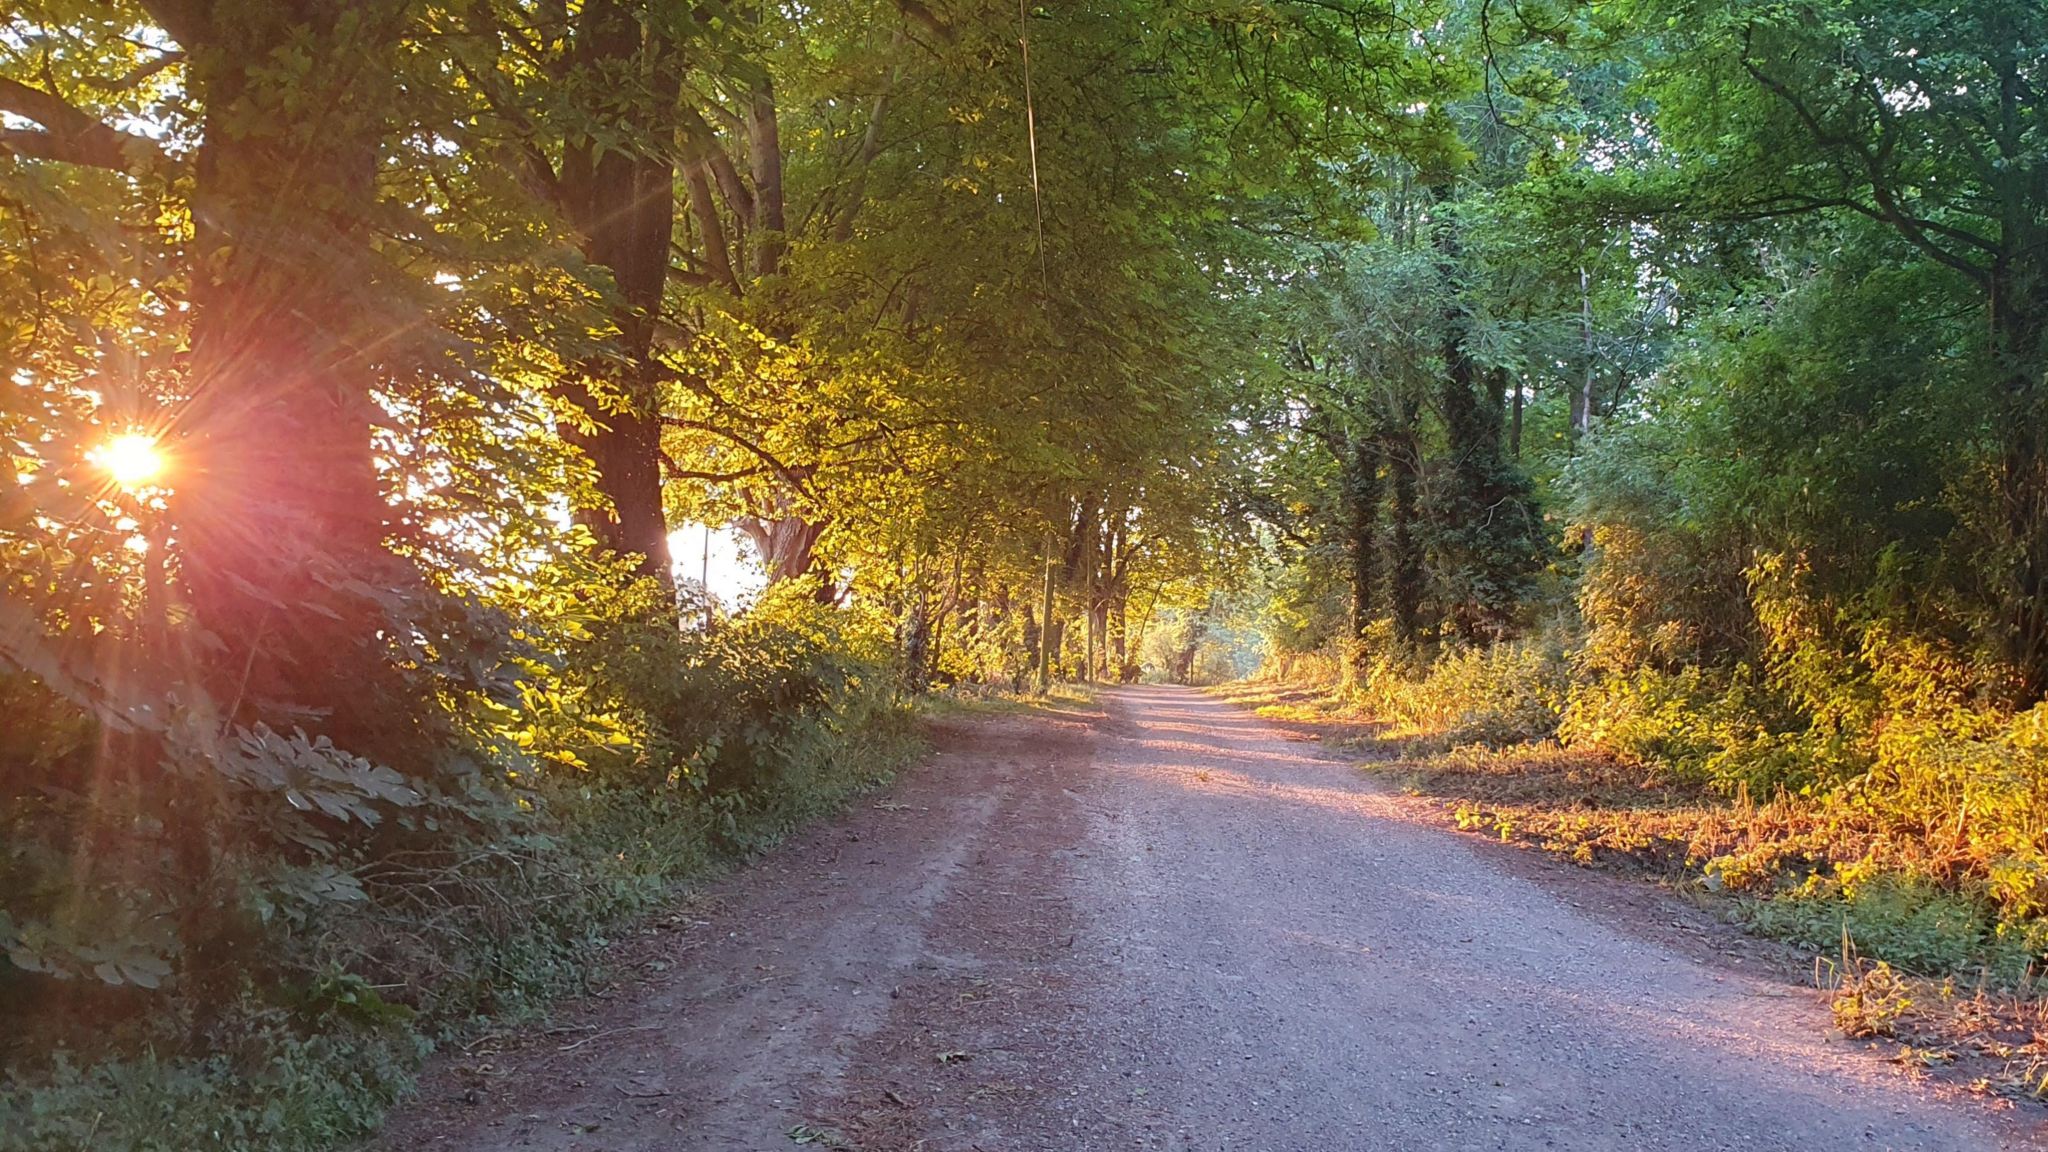 A rural-looking path in Brightwell Baldwin with thick, mature trees providing shade from the sun, which can be seen beaming through gaps in the greenery